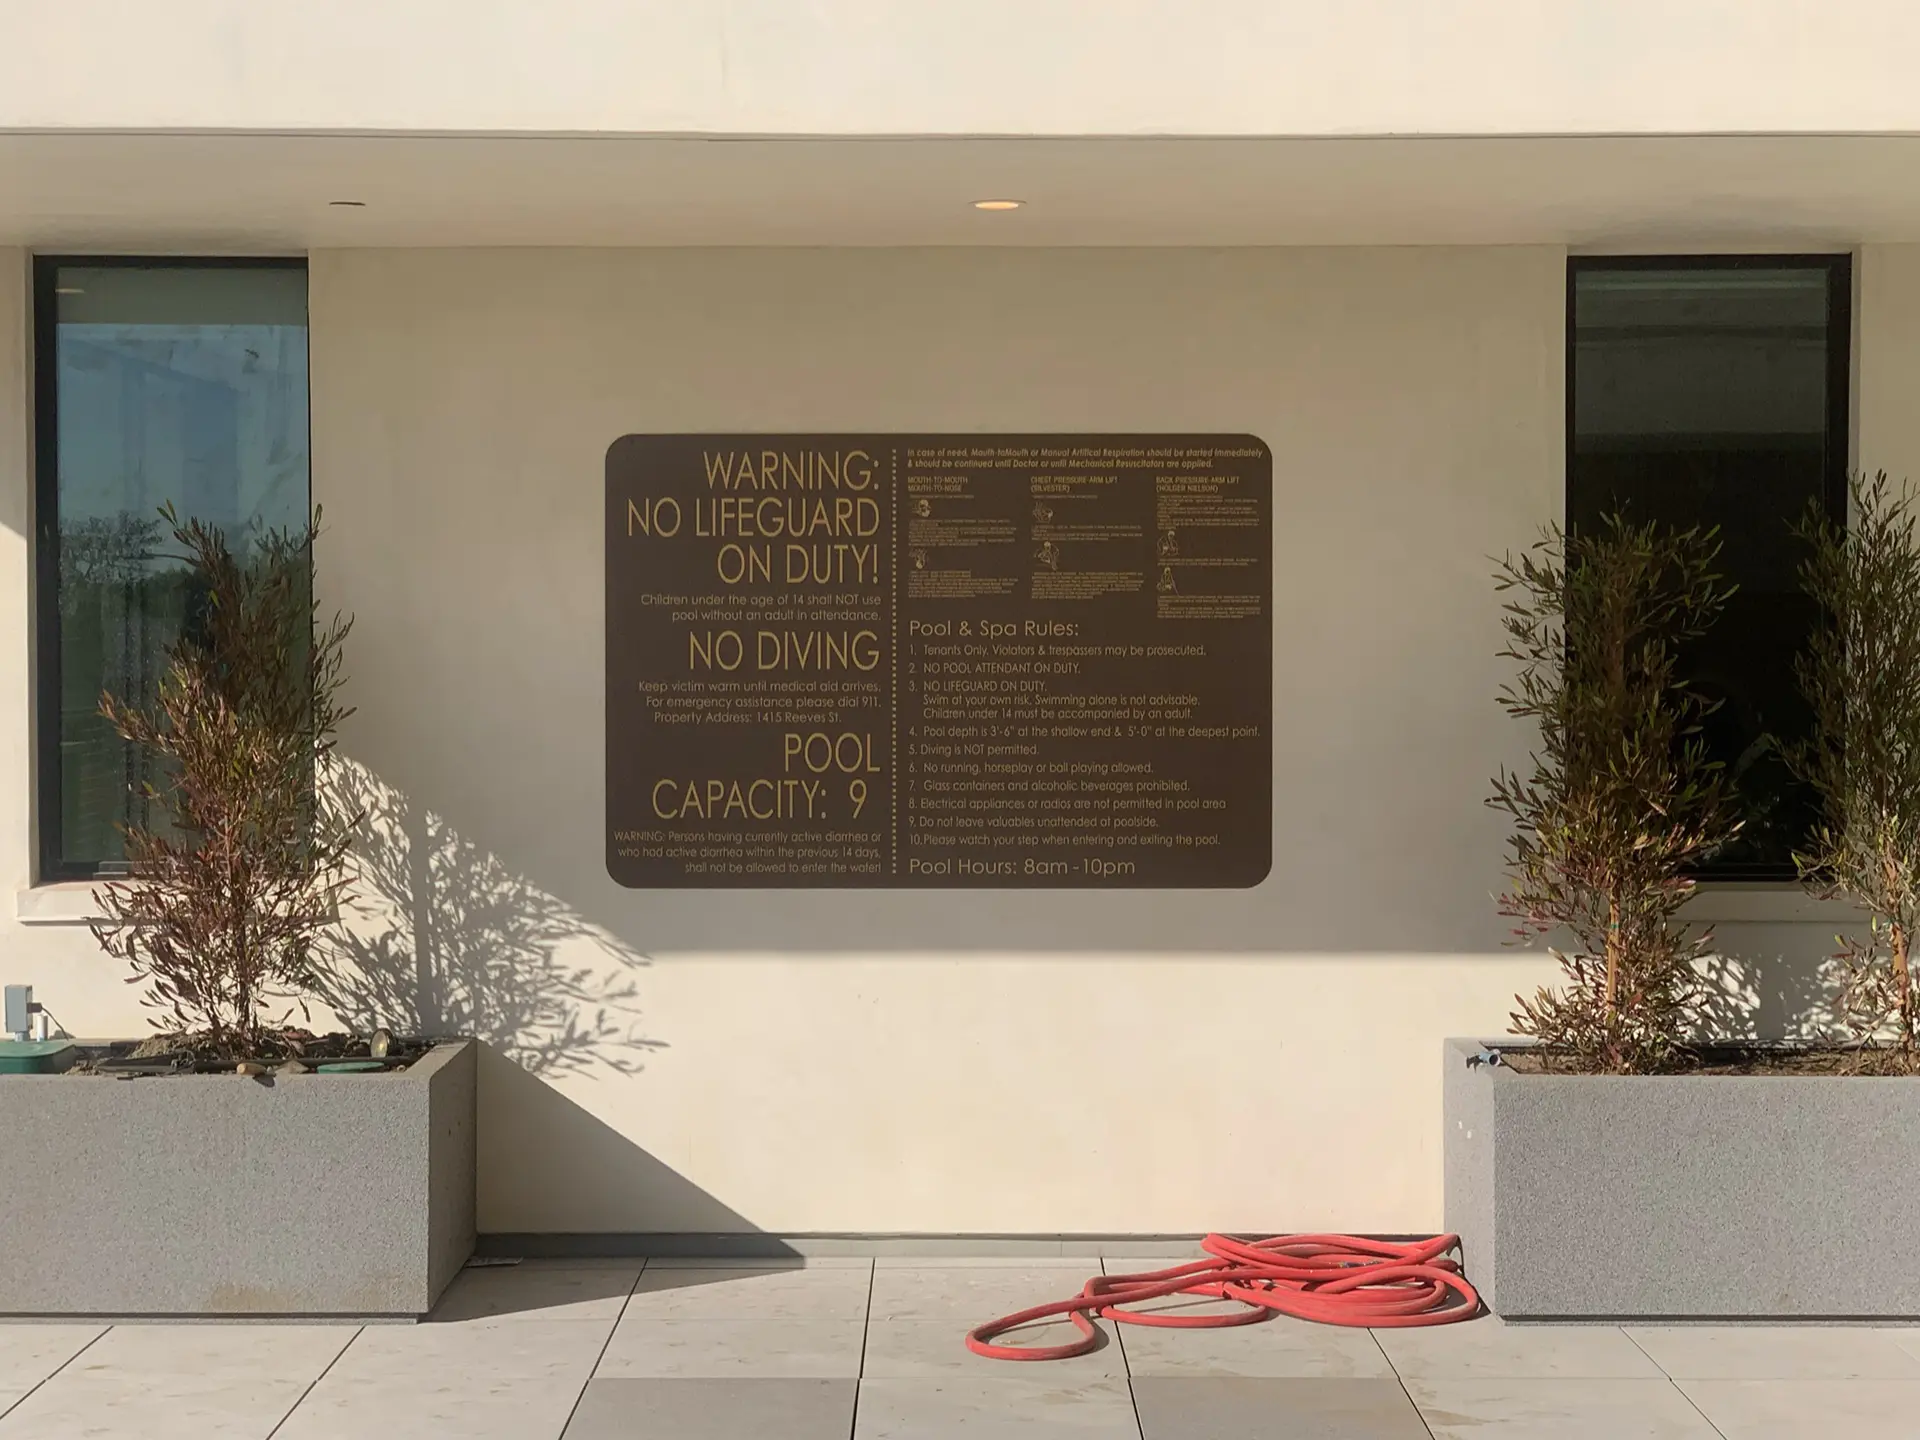 An ADA sign for a pool in Los Angeles